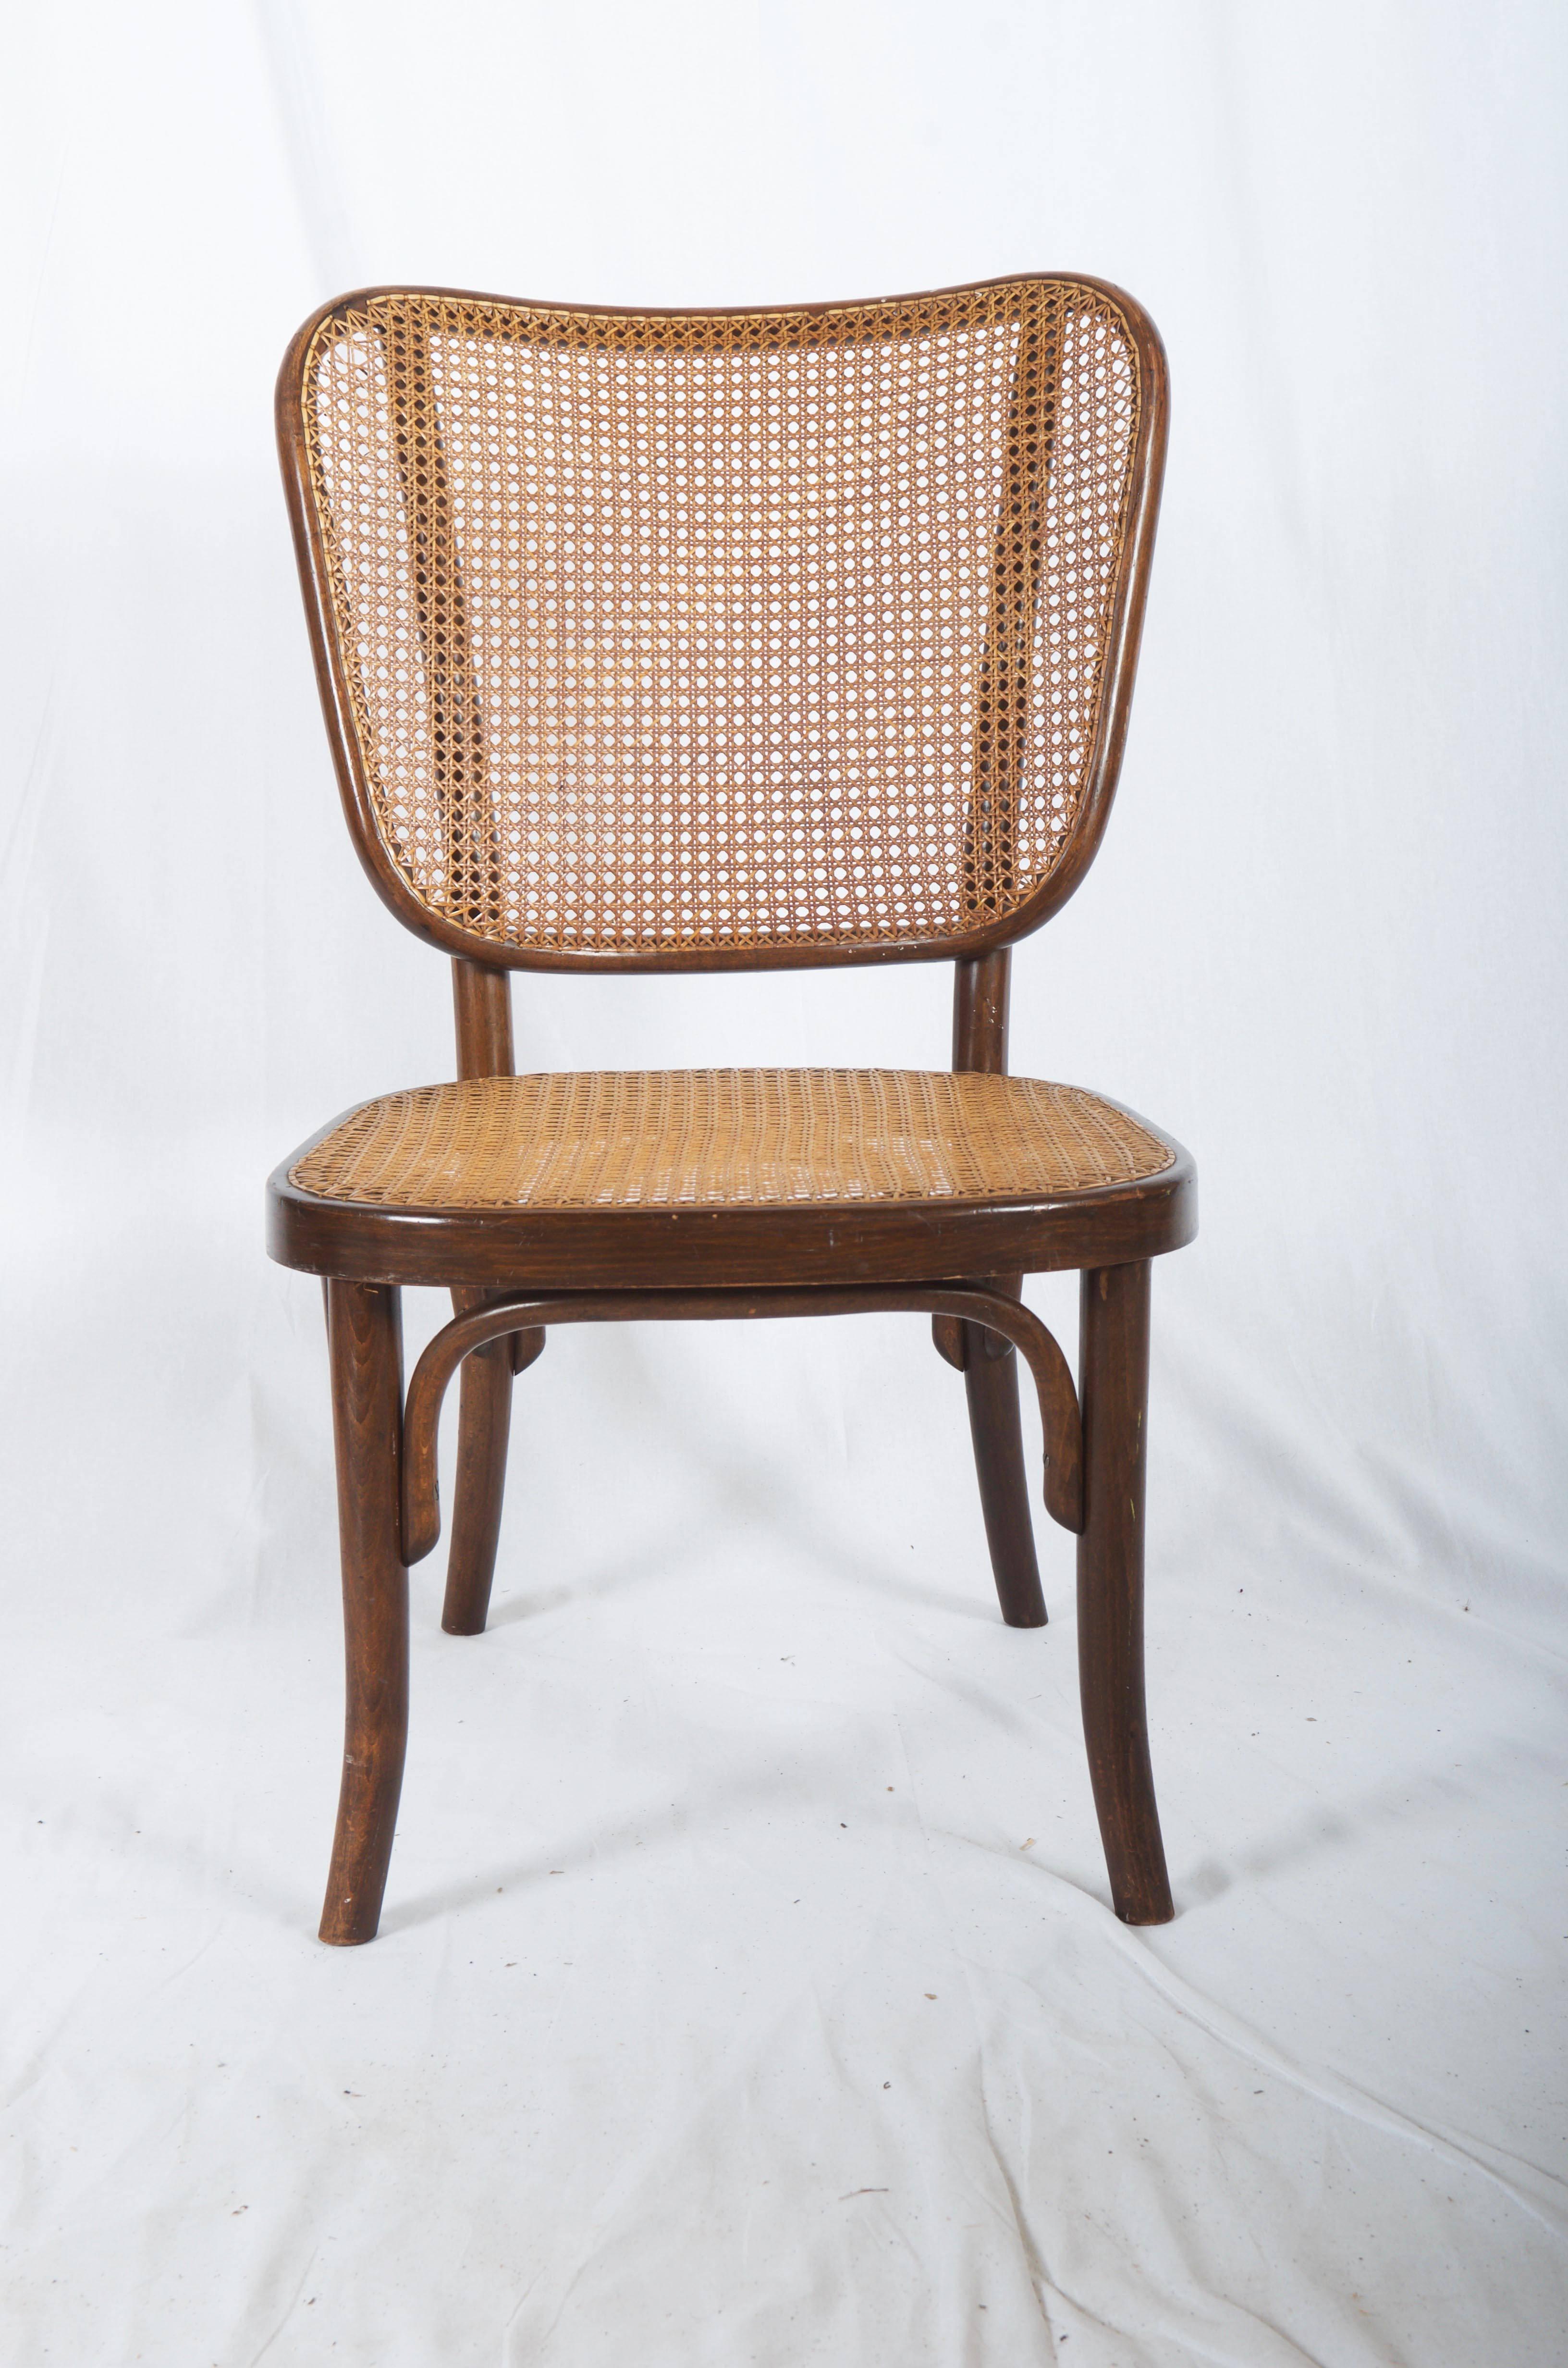 Beech bentwood with caned seat and backrest, designed by Gustav Adolf Schneck and made by Thonet in the late 1930s. Perfect unrestored original condition. Signed on the frame.